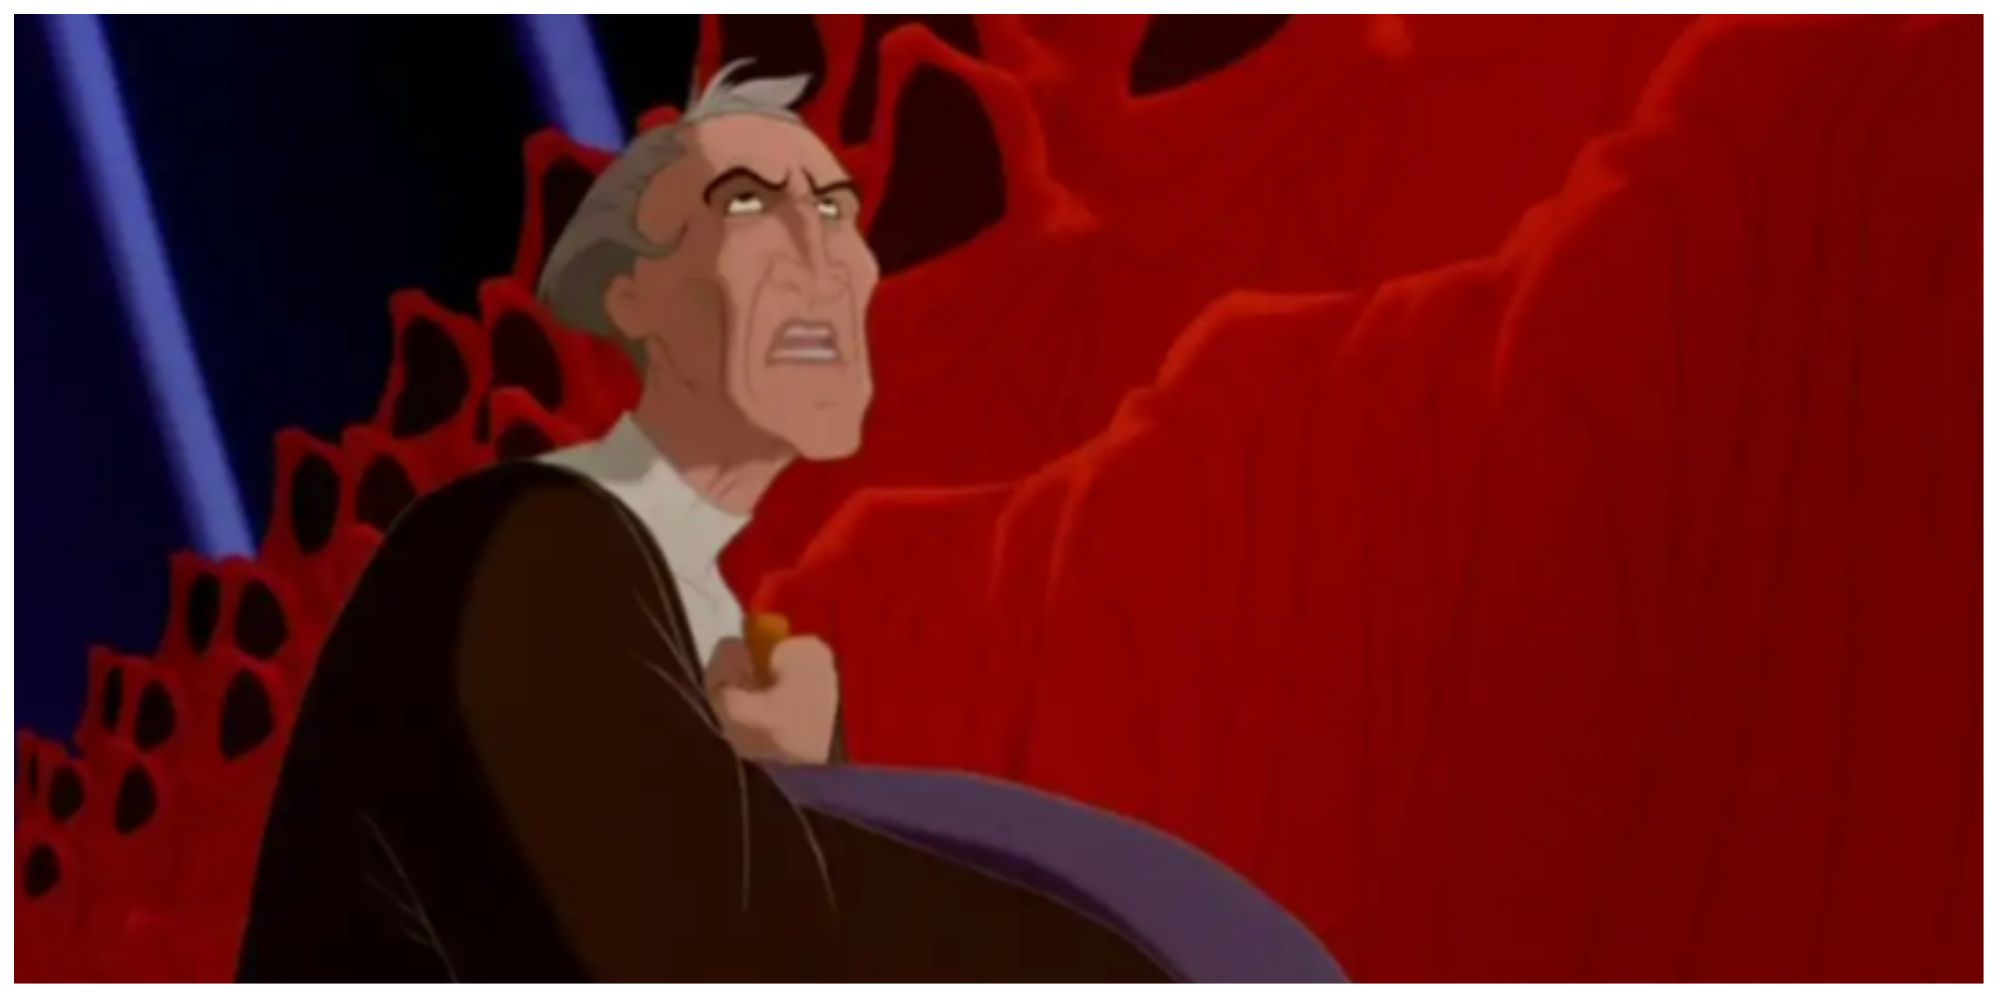 Judge Claude Frollo in The Hunchback of Notre Dame